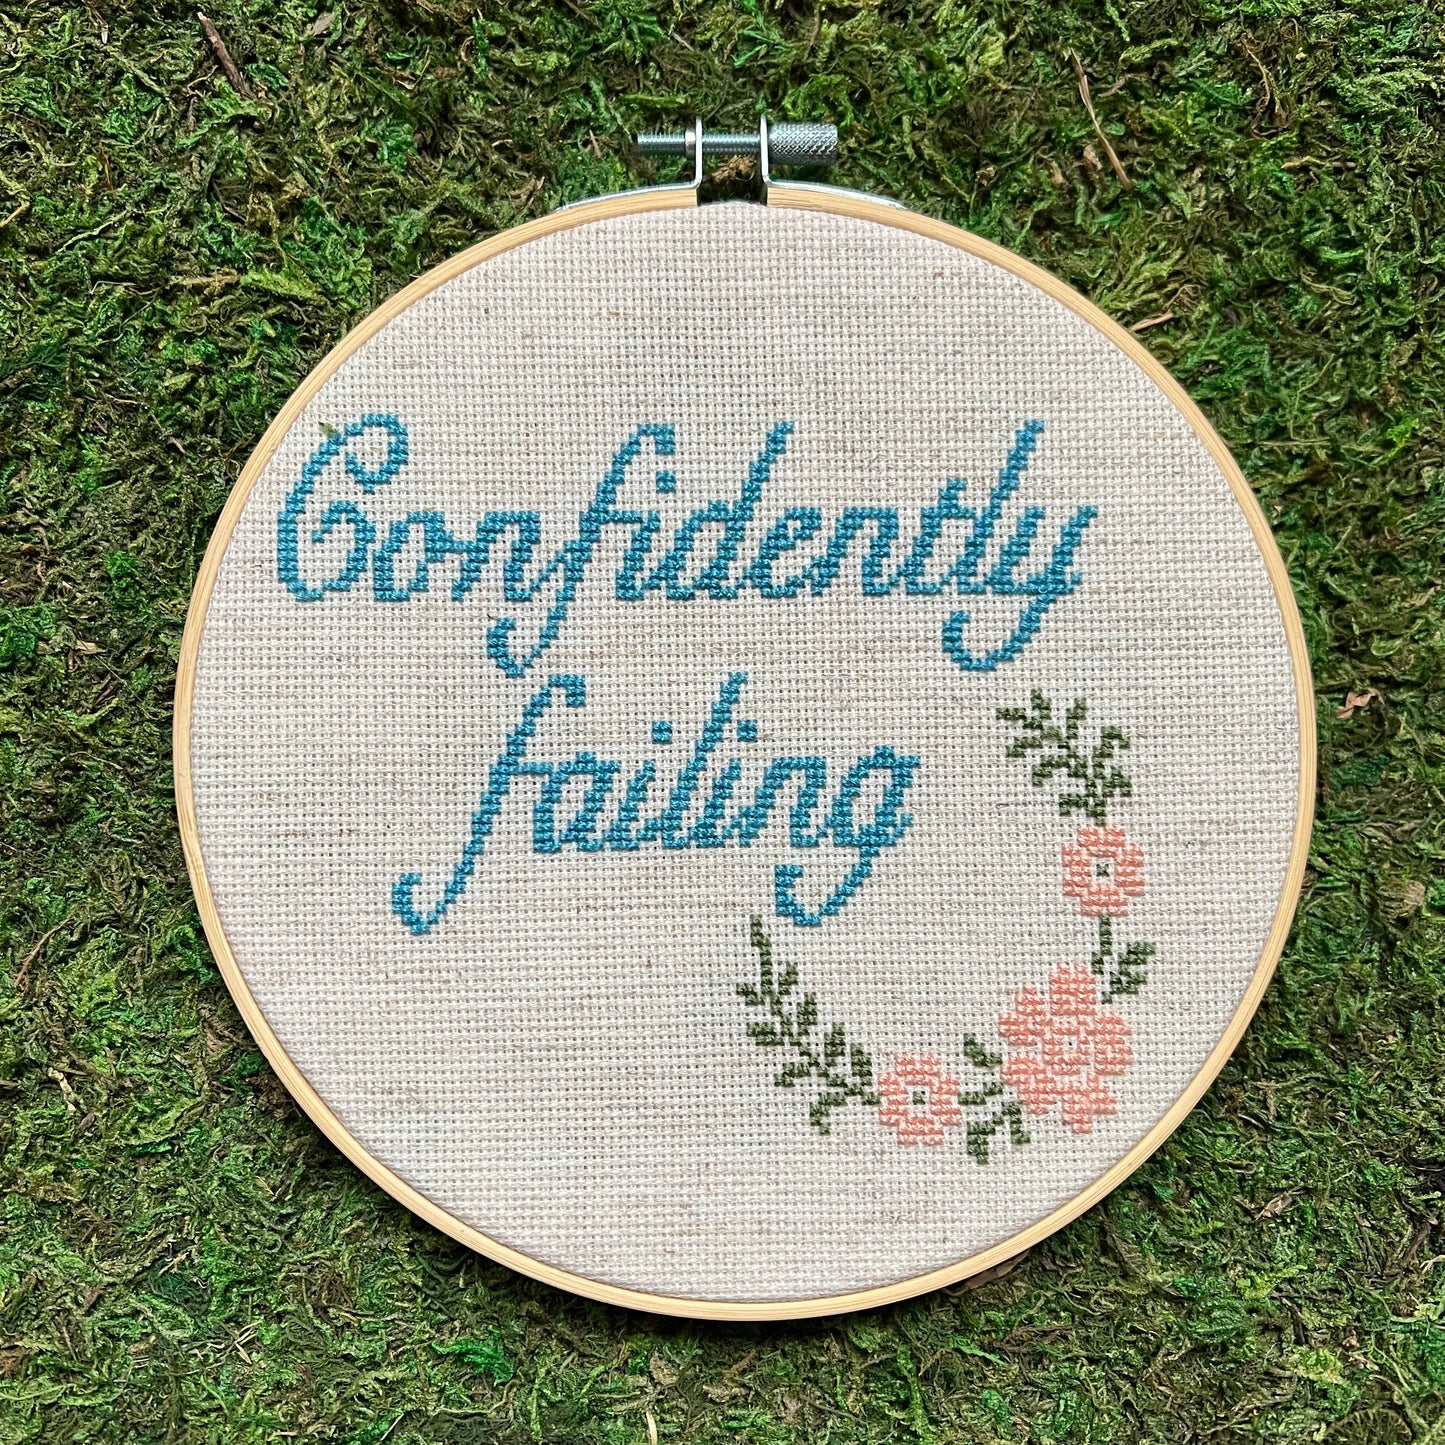 Confidently Failing 7” Hand Stitched Cross Stitch Hoop